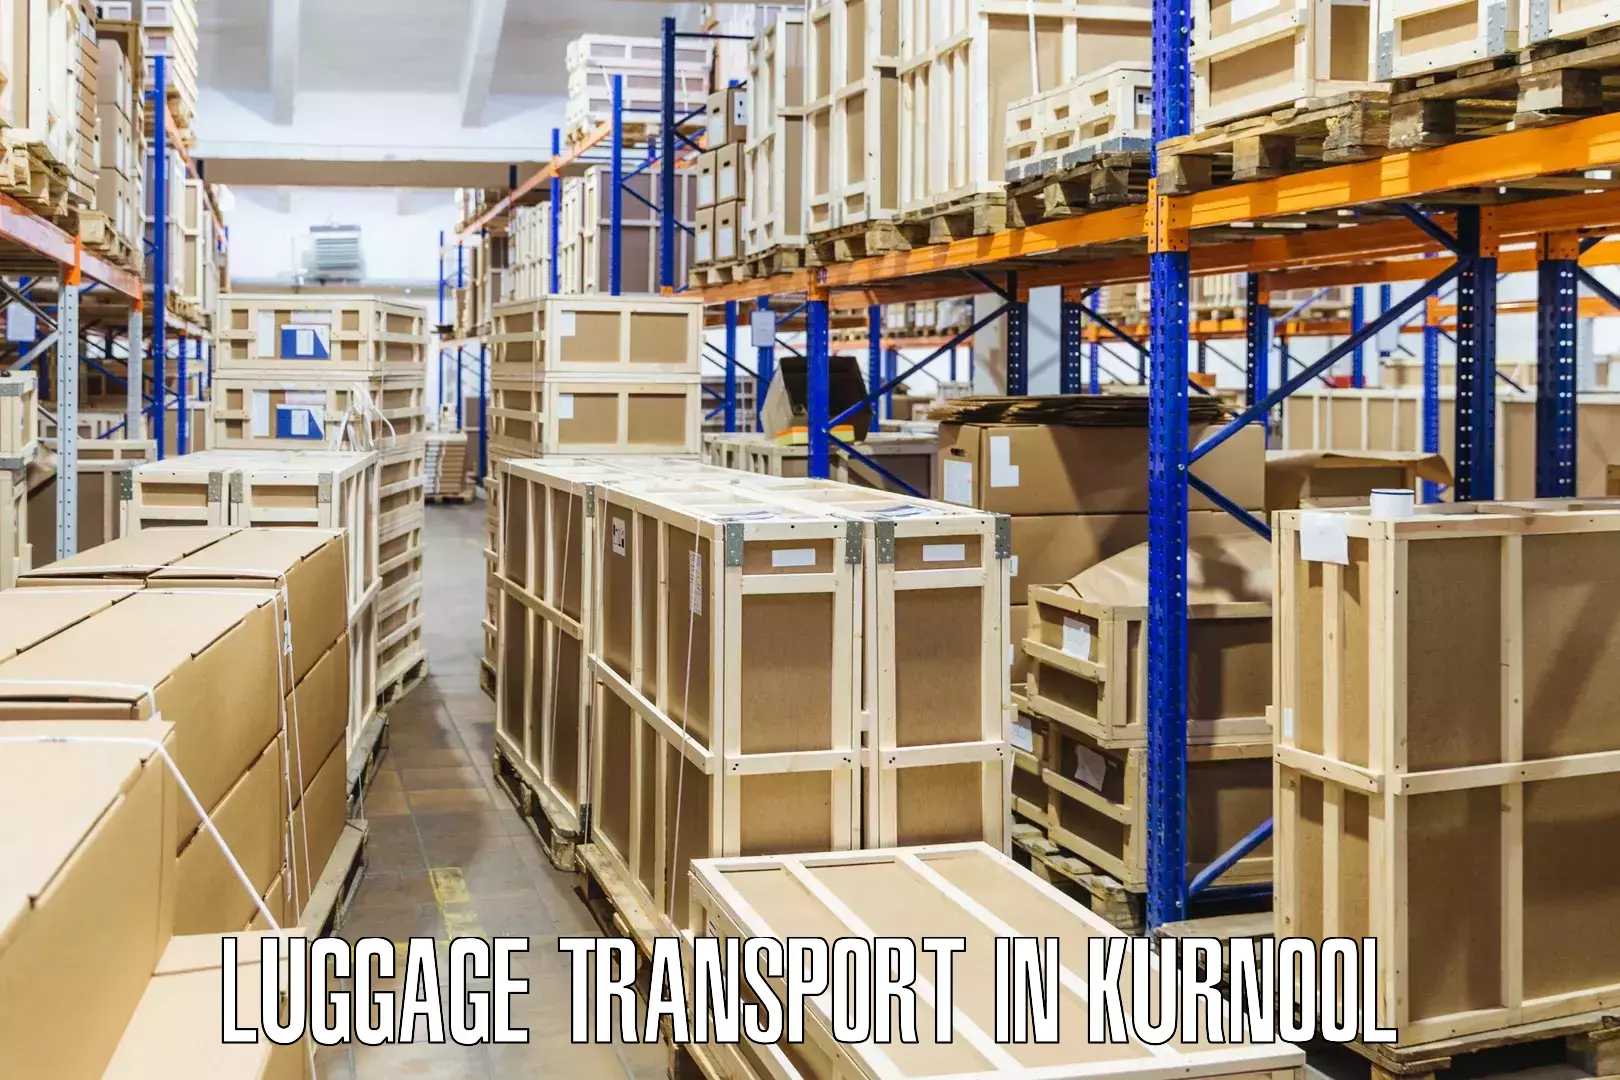 Baggage transport services in Kurnool